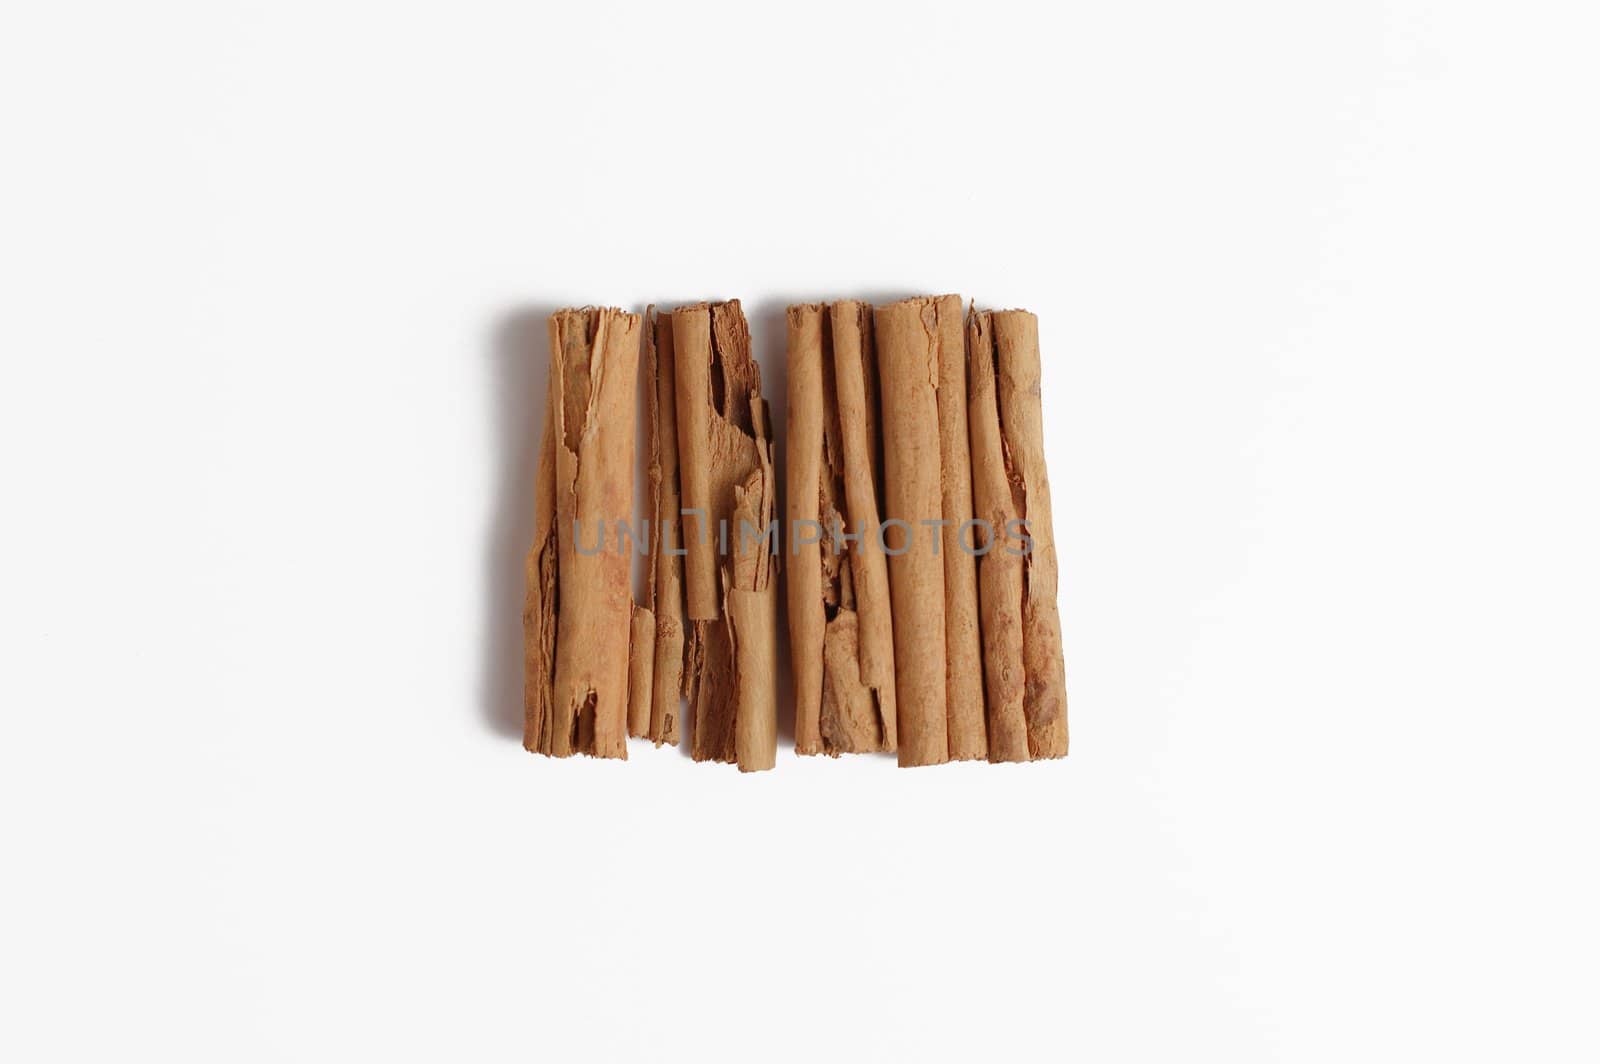 Cinnamon sticks dispaly isolated on white background.